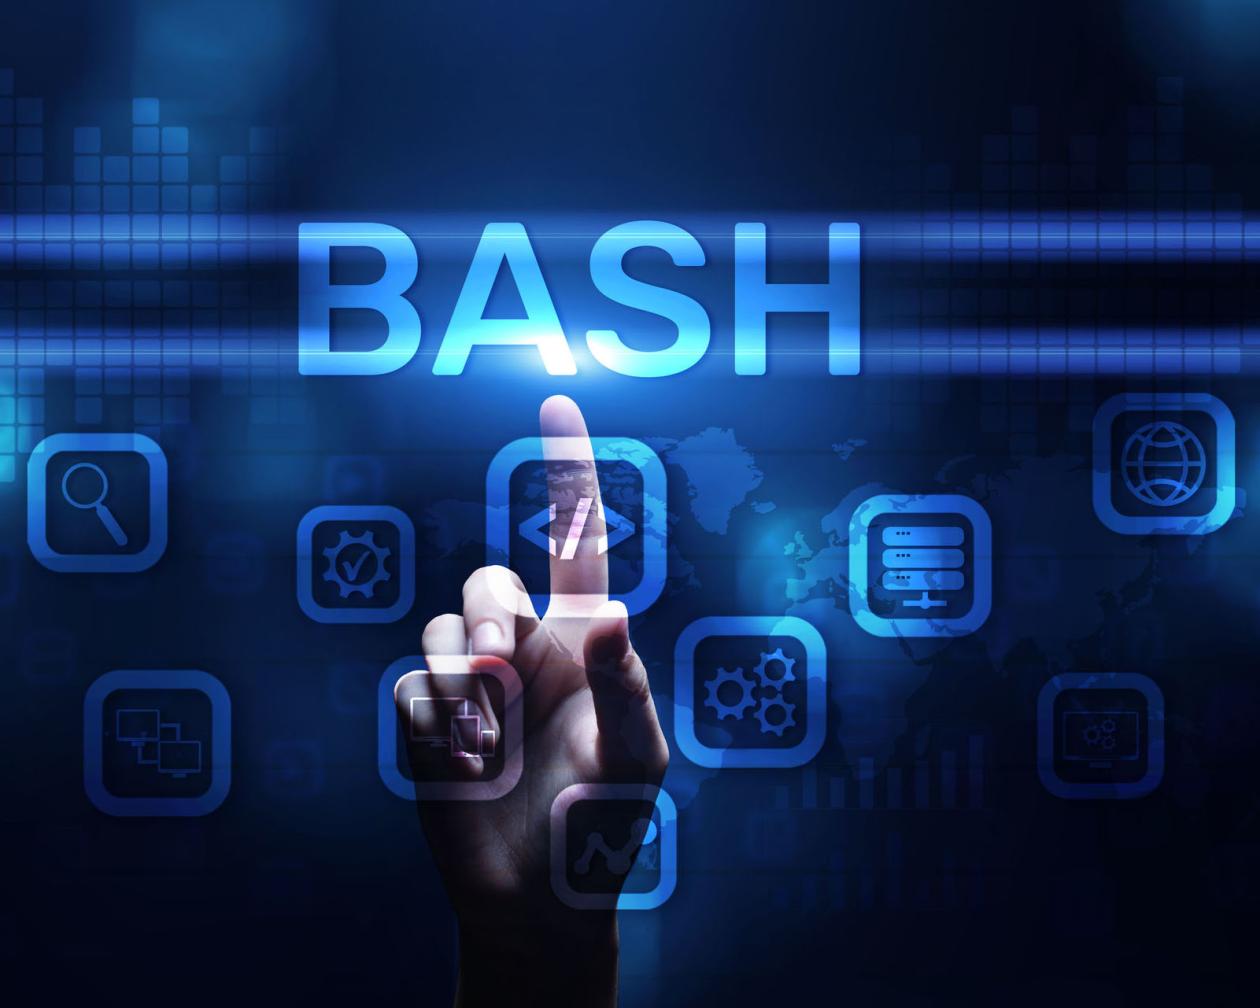 What Are The Benefits Of Using Bash For System Administration?